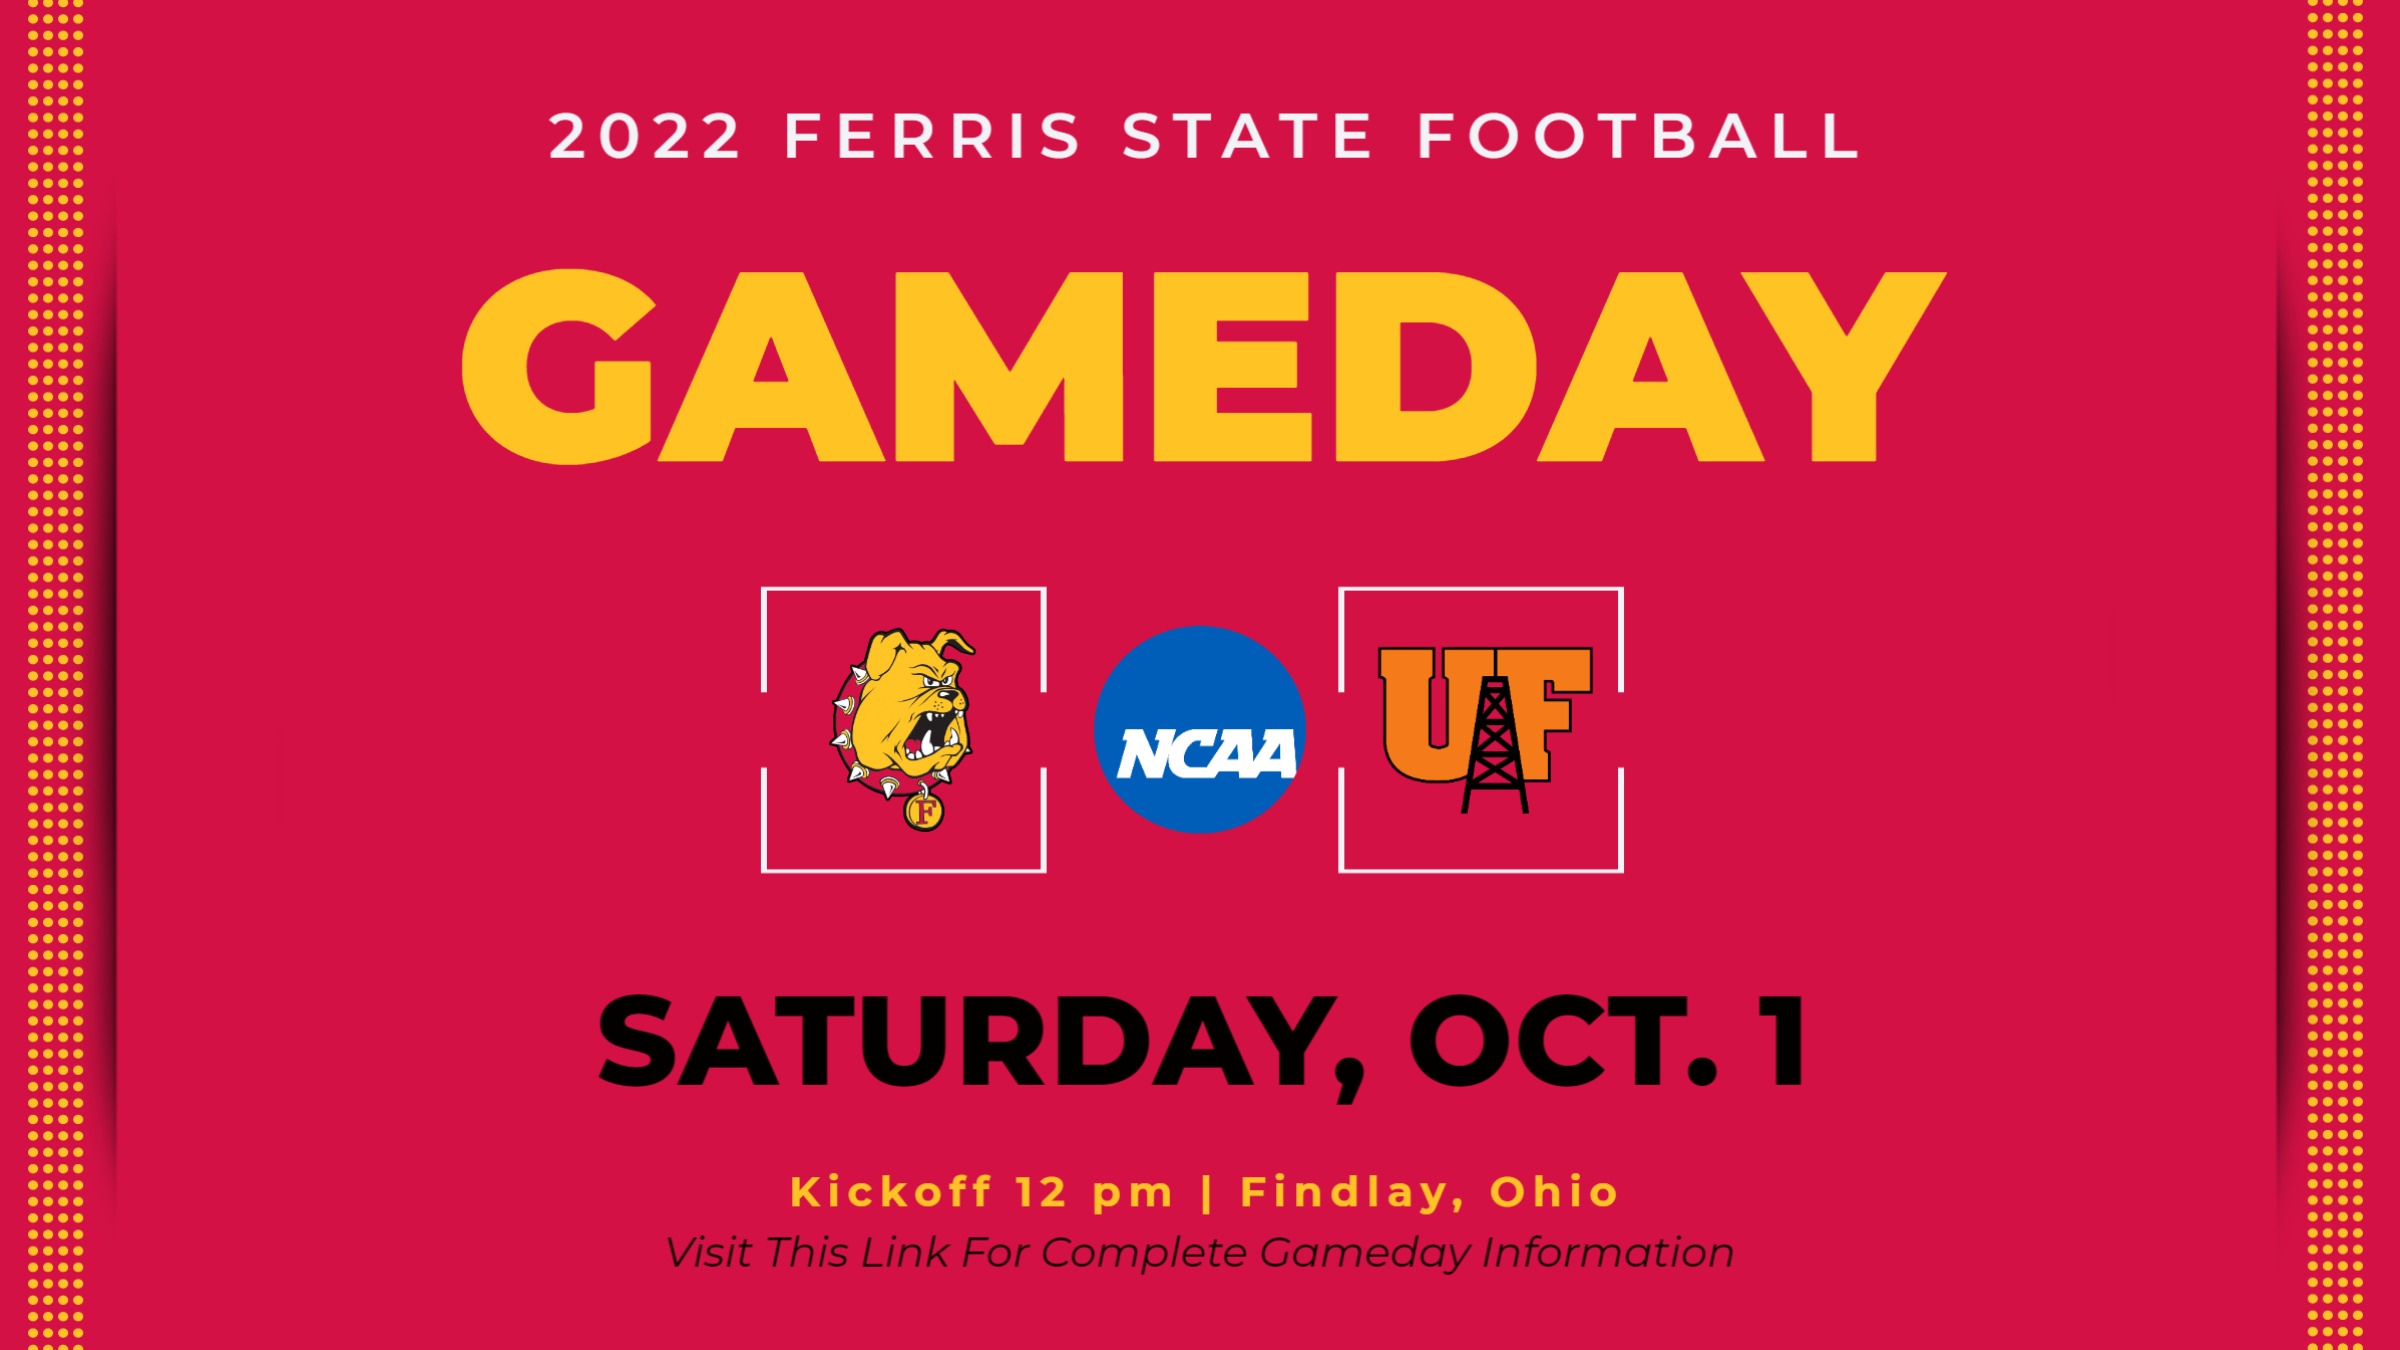 GAMEDAY: Ferris State at Findlay (Saturday, Oct. 1)